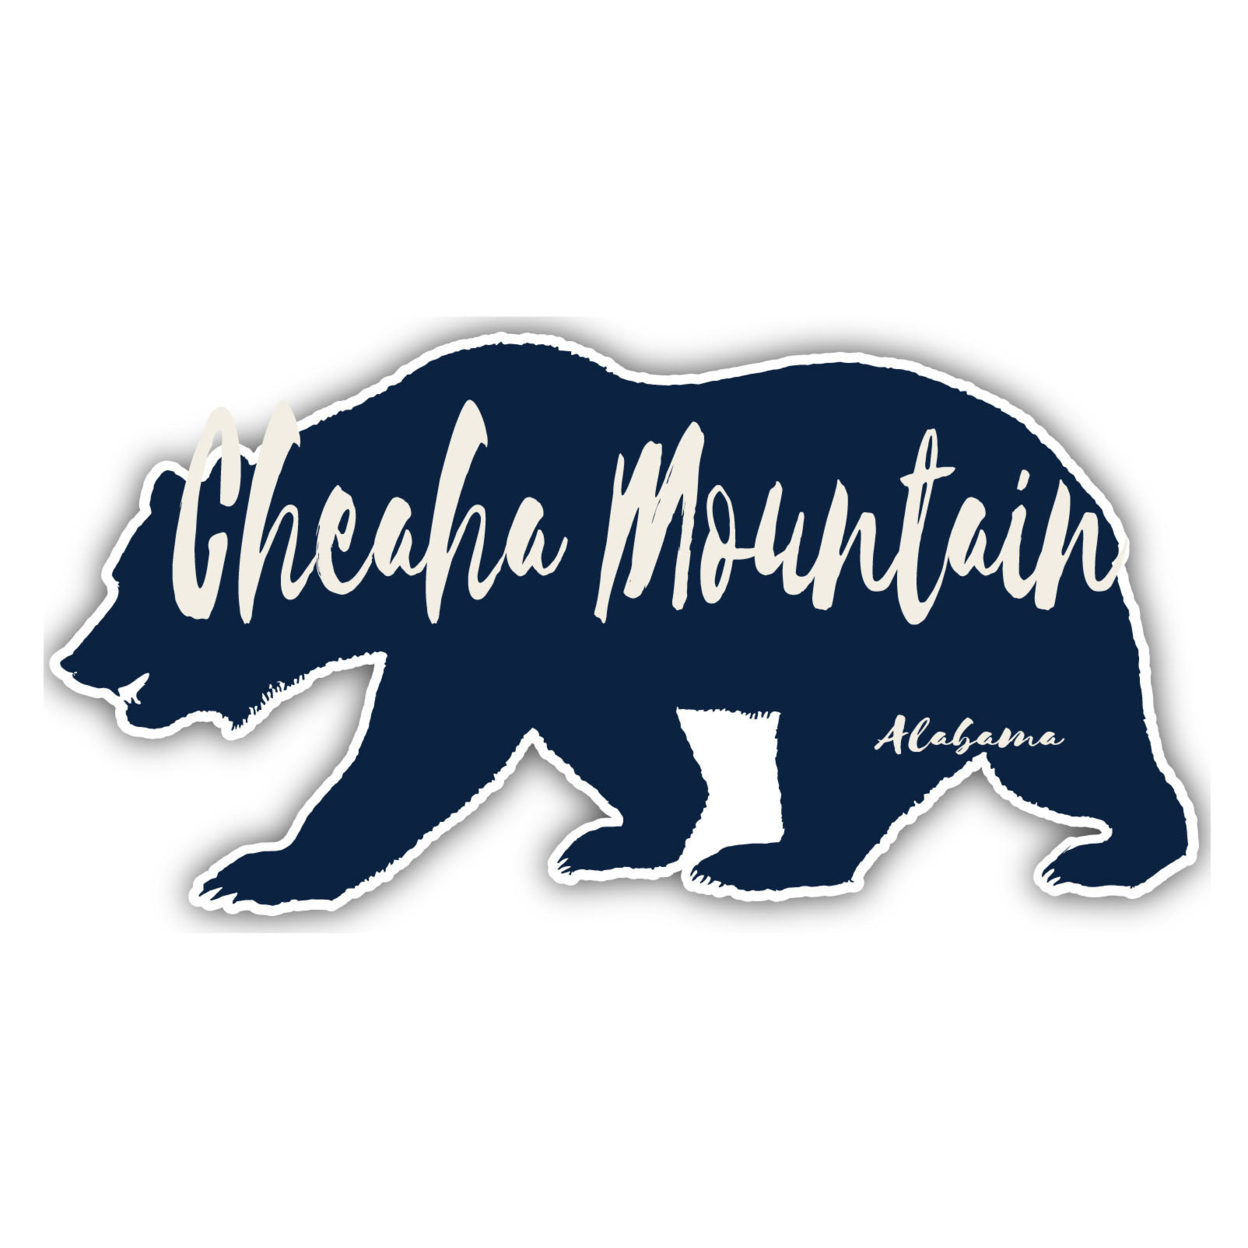 Cheaha Mountain Alabama Souvenir Decorative Stickers (Choose Theme And Size) - 4-Pack, 12-Inch, Camp Life